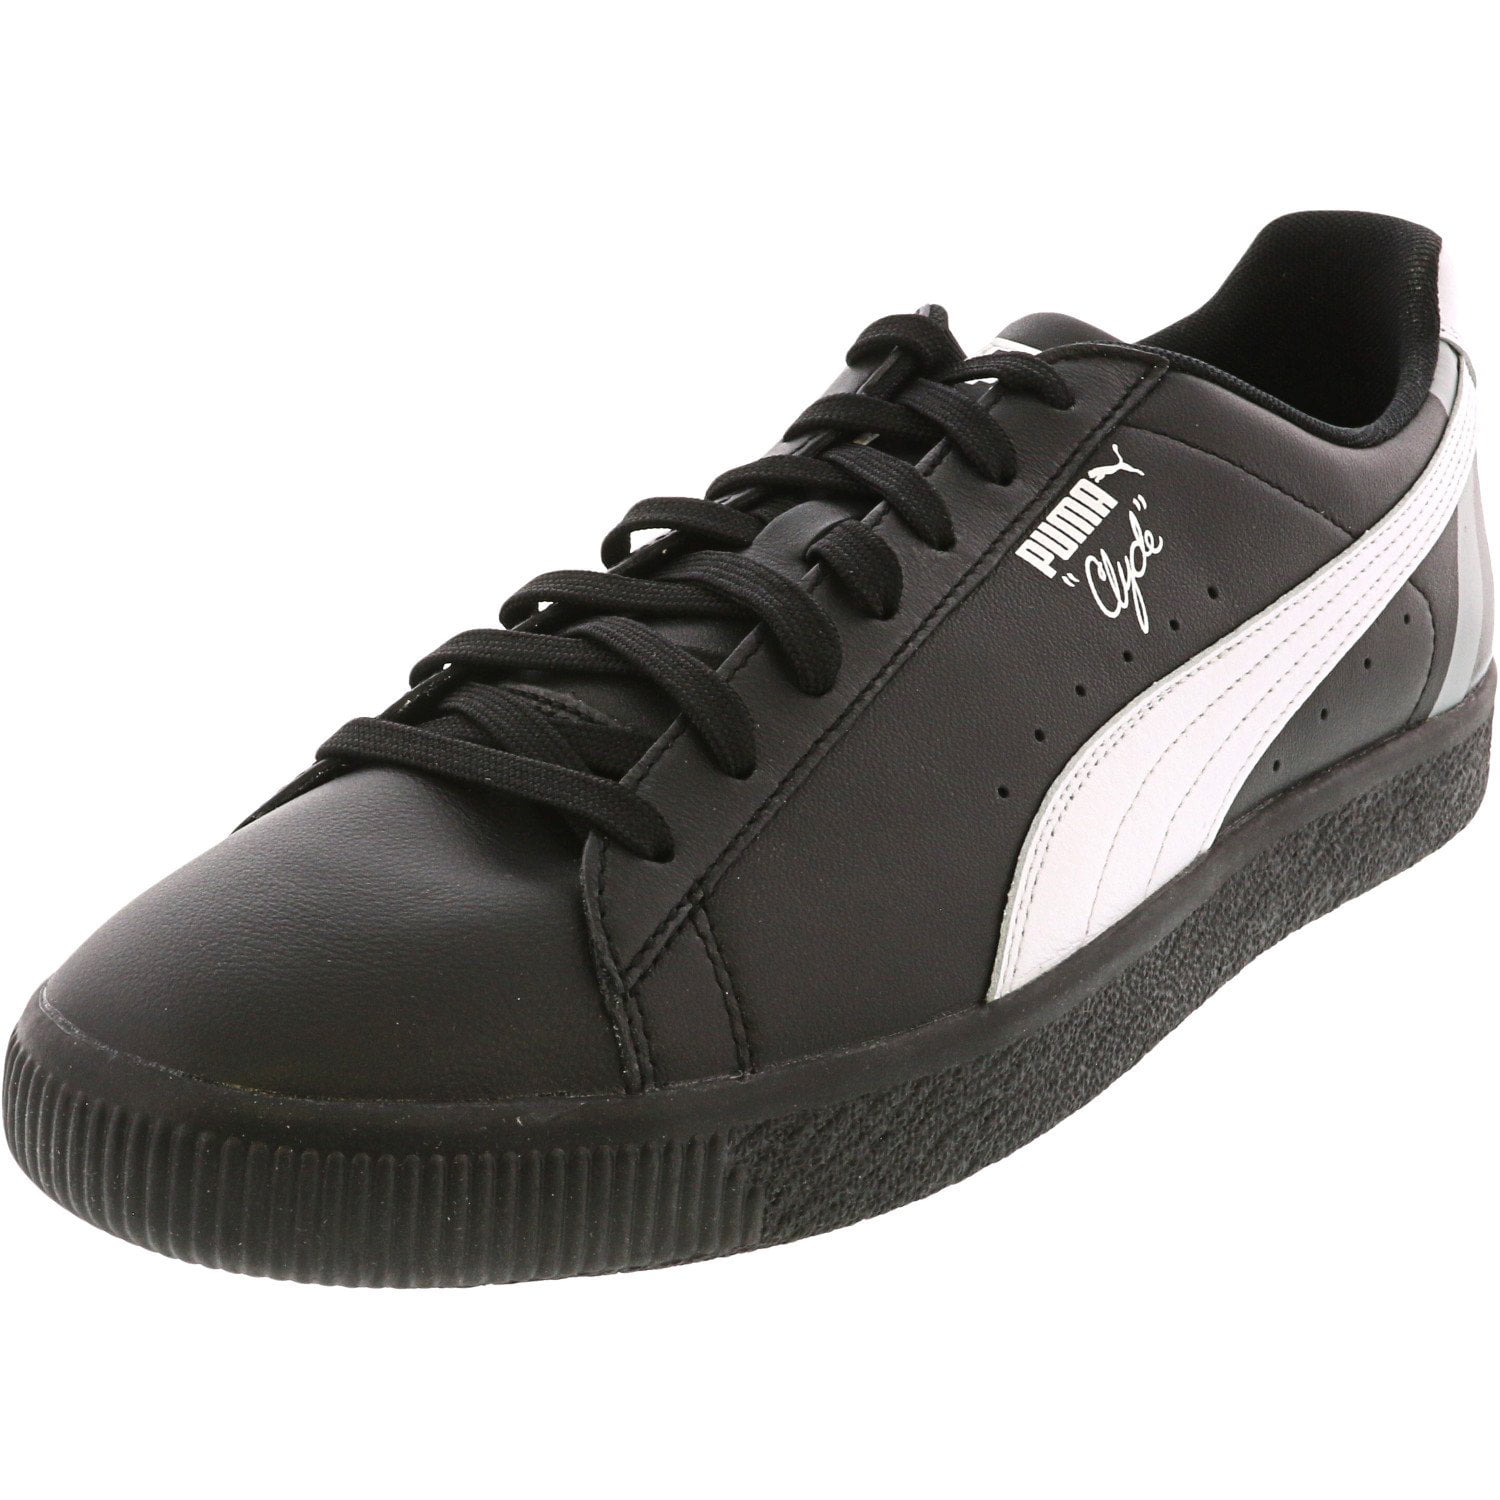 Puma Men's Clyde Stripes Black / White Ankle-High Leather Sneaker - 13M ...